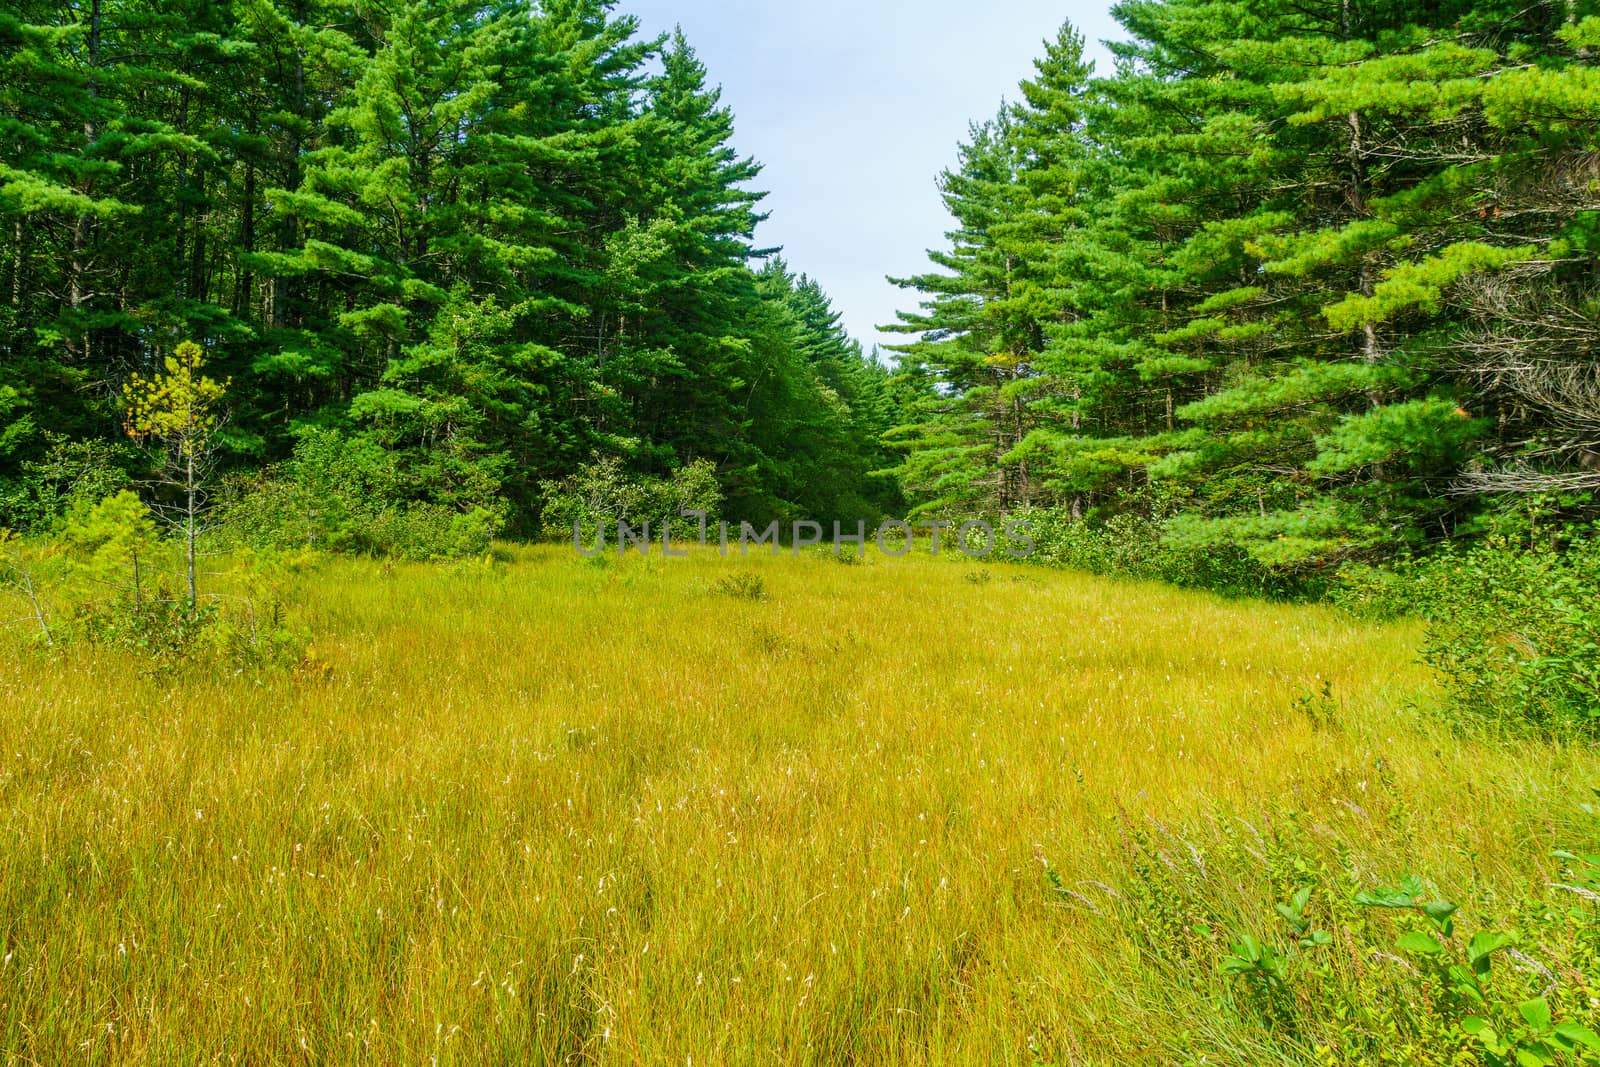 View of trees and forest, in Kejimkujik National Park, Nova Scotia, Canada